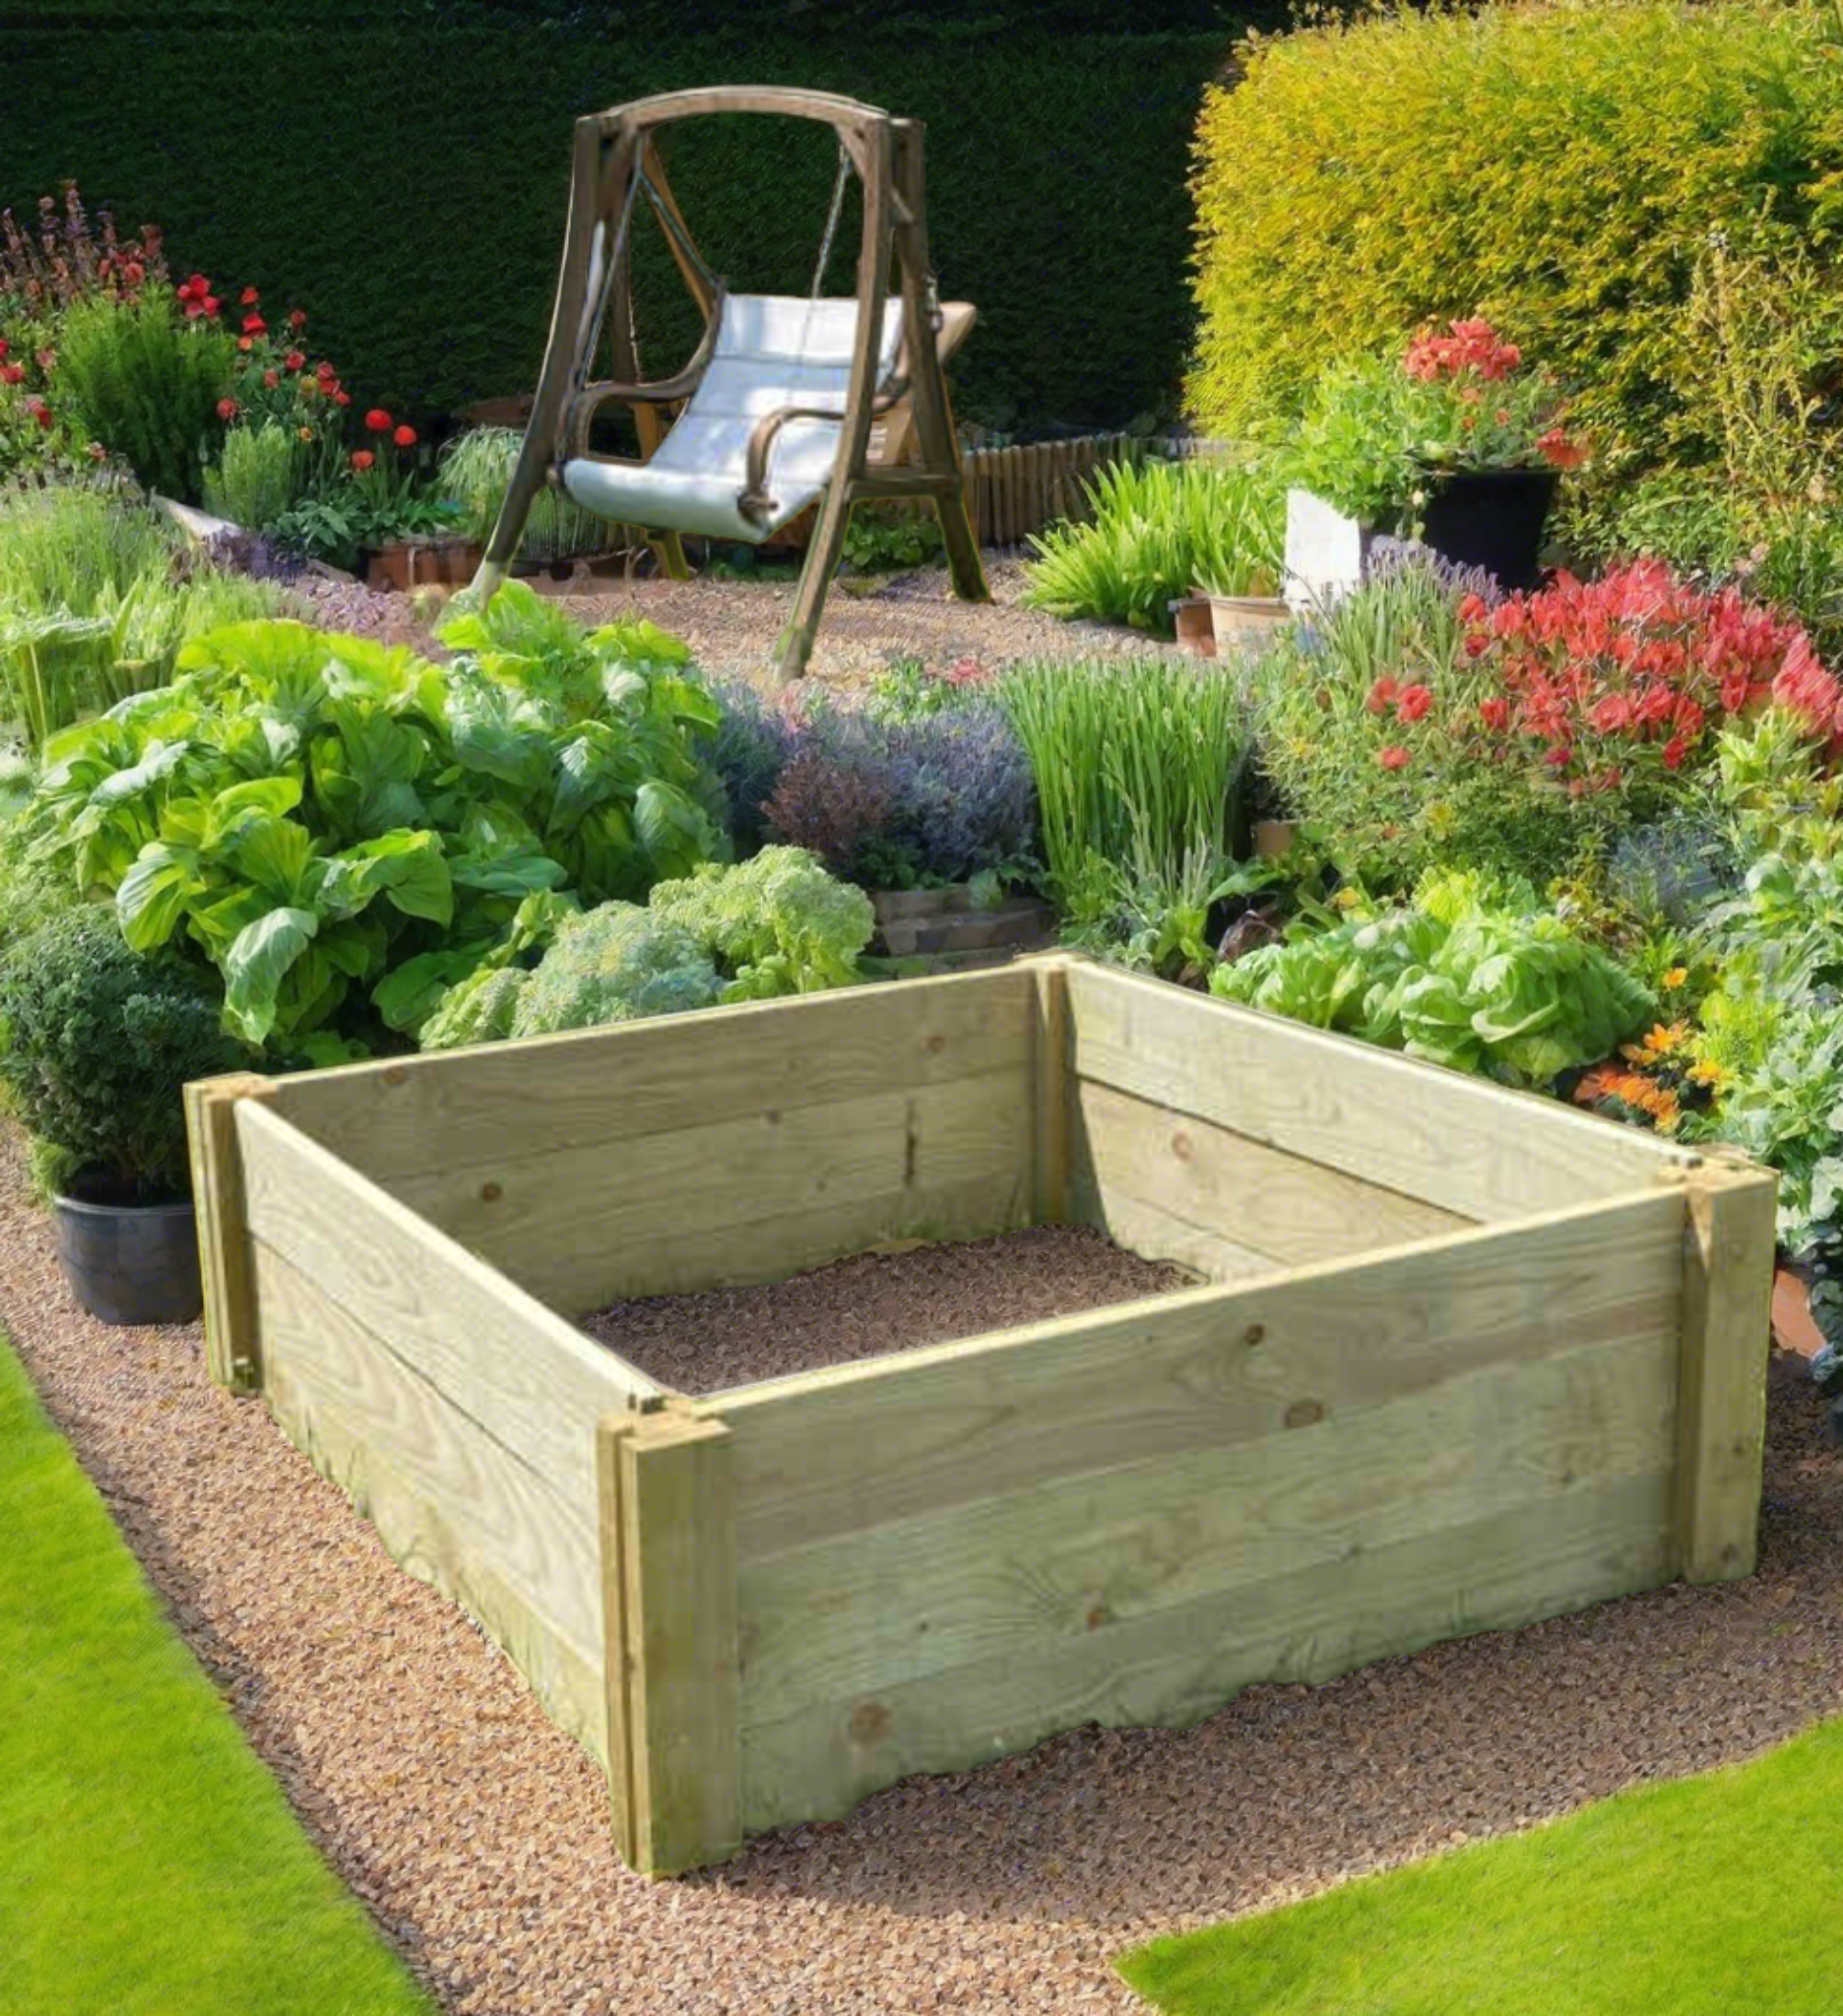 Single bay raised bed for flowers or vegetables